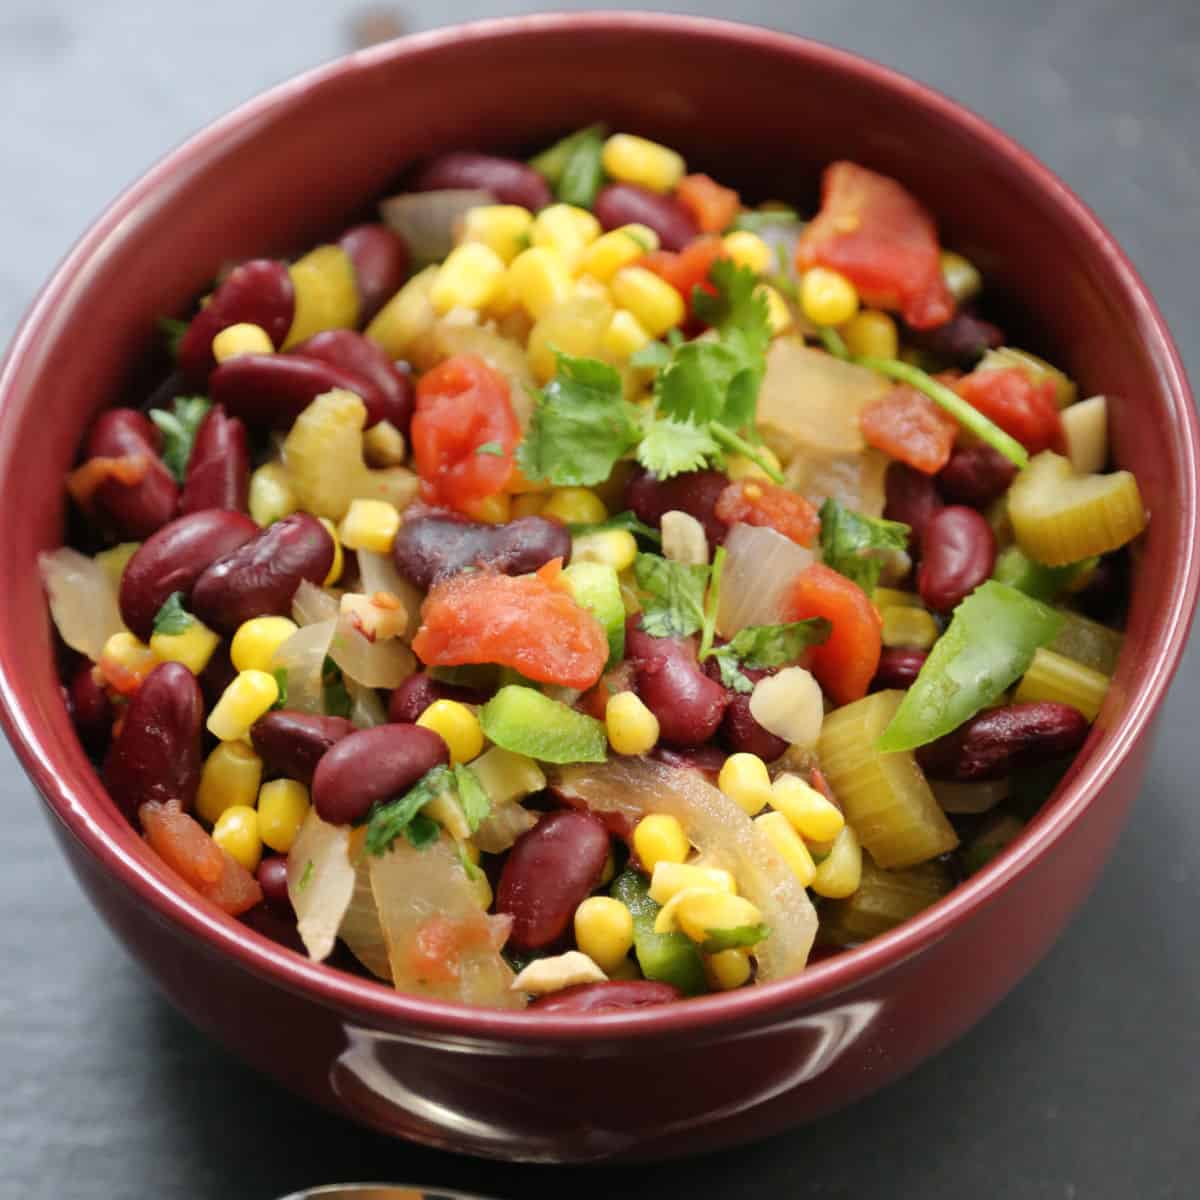 Crockpot Vegetable Chili in a red bowl